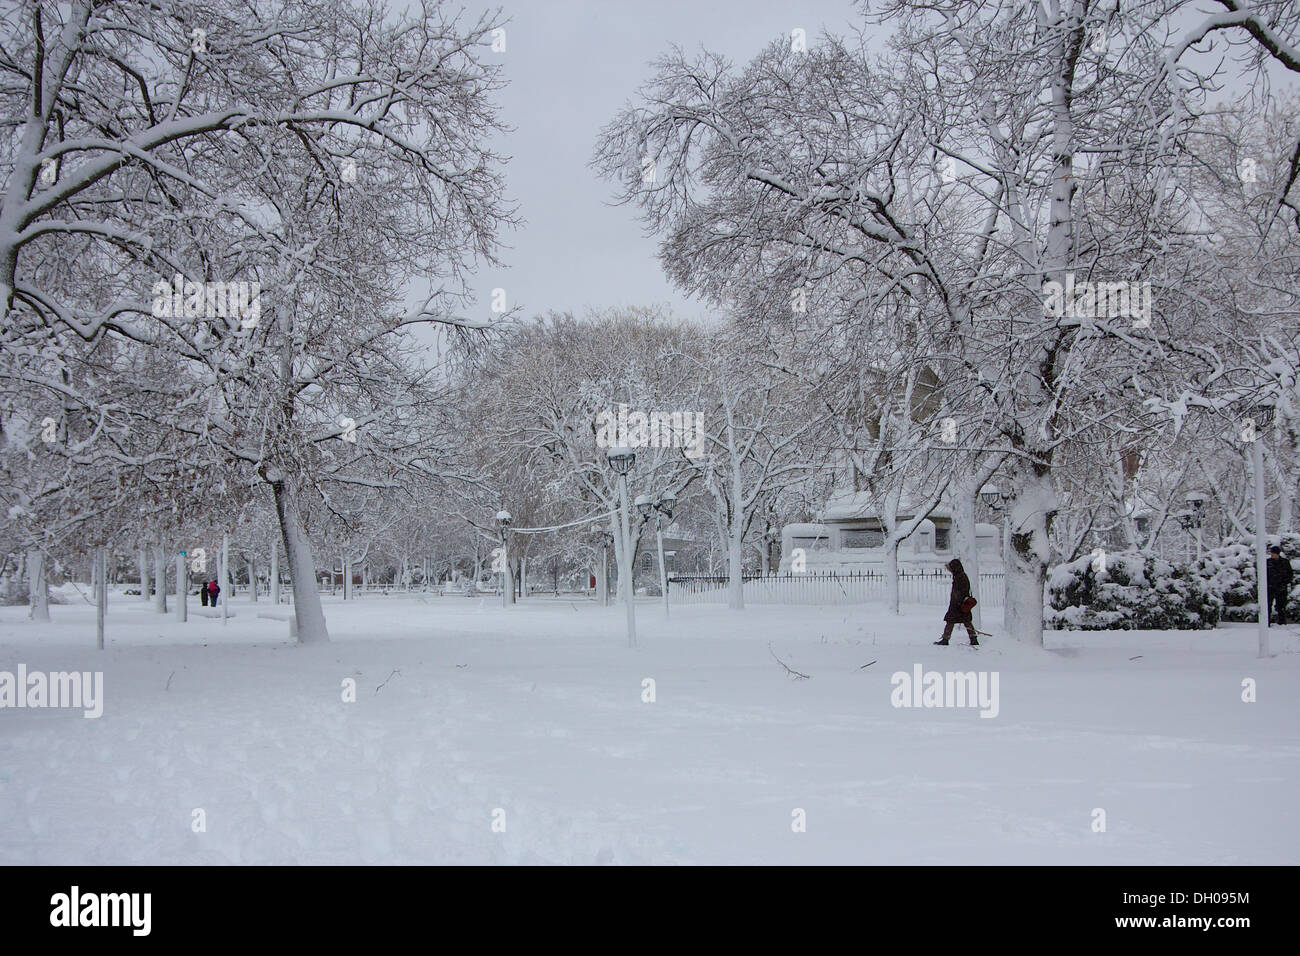 Cambridge Common park near Harvard University campus in Cambridge, MA, USA covered in snow after a blizzard. Stock Photo